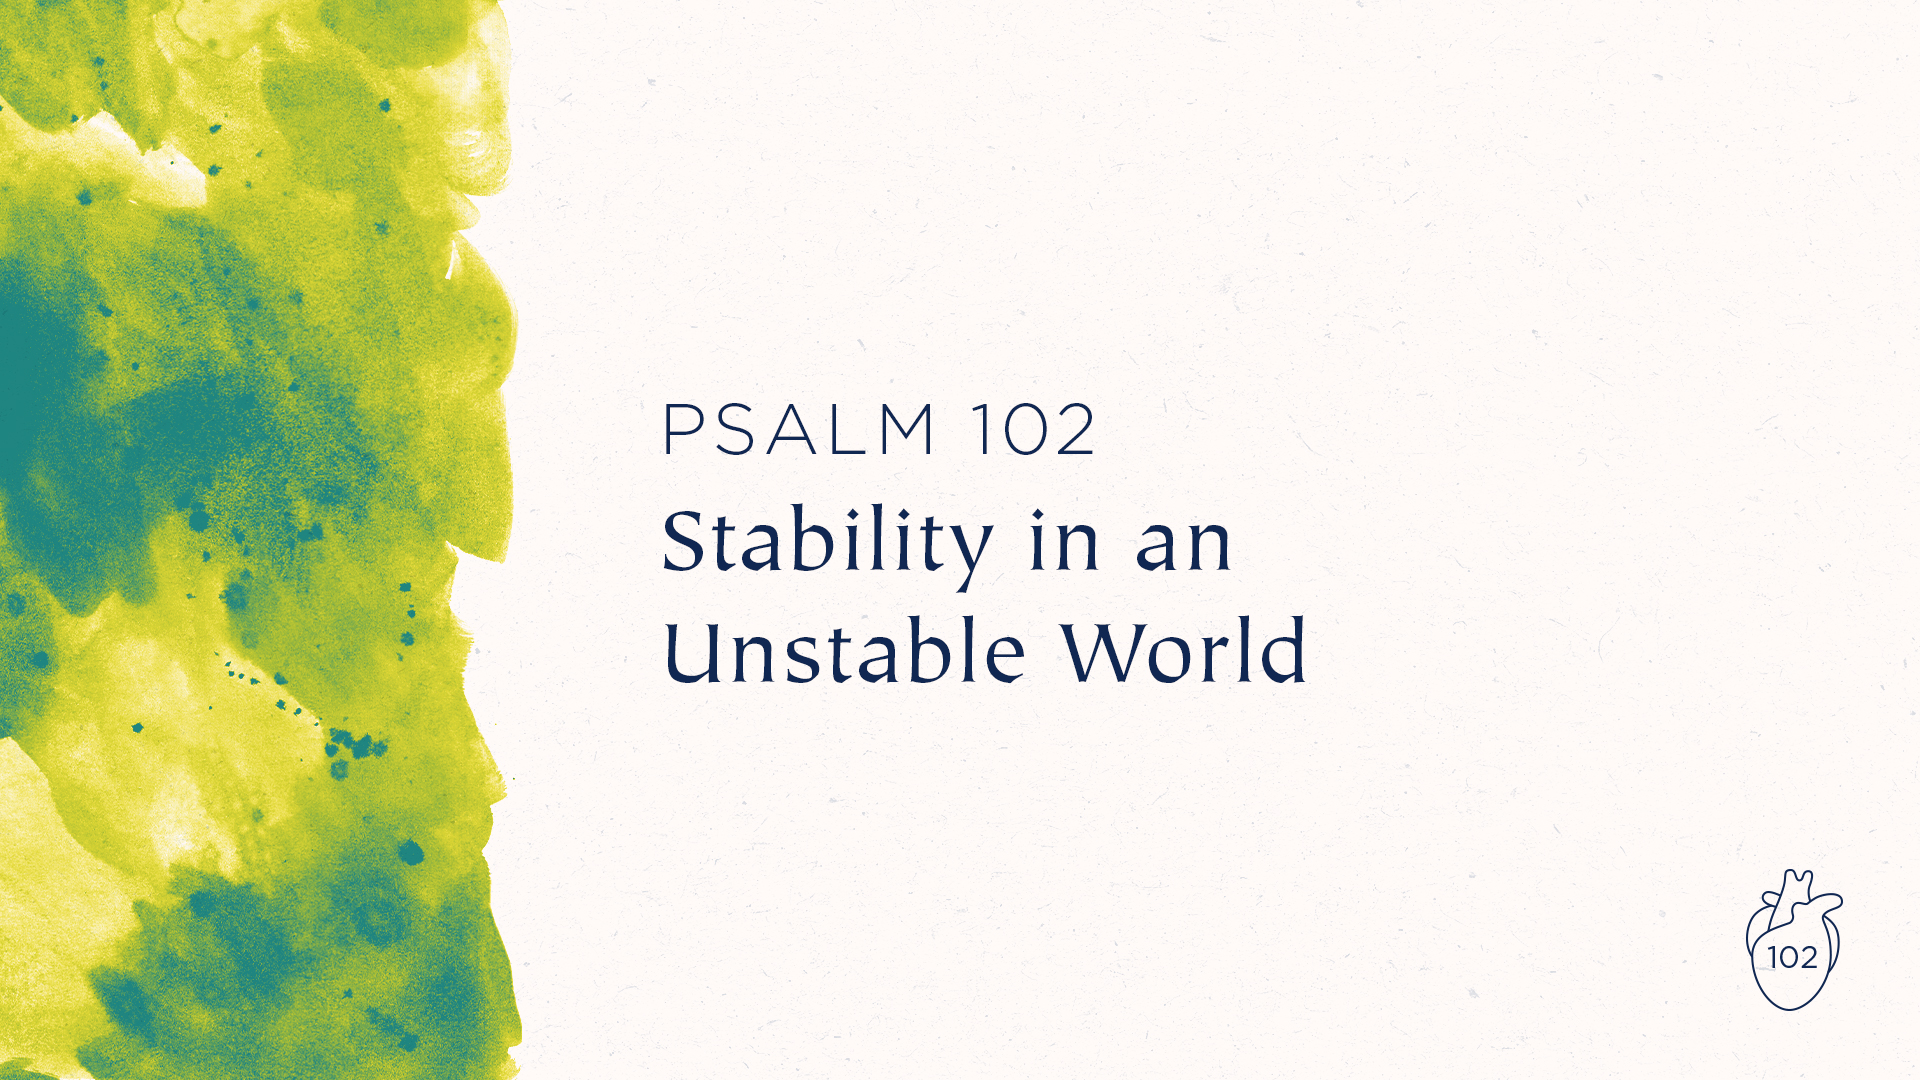 Stability in an Unstable World